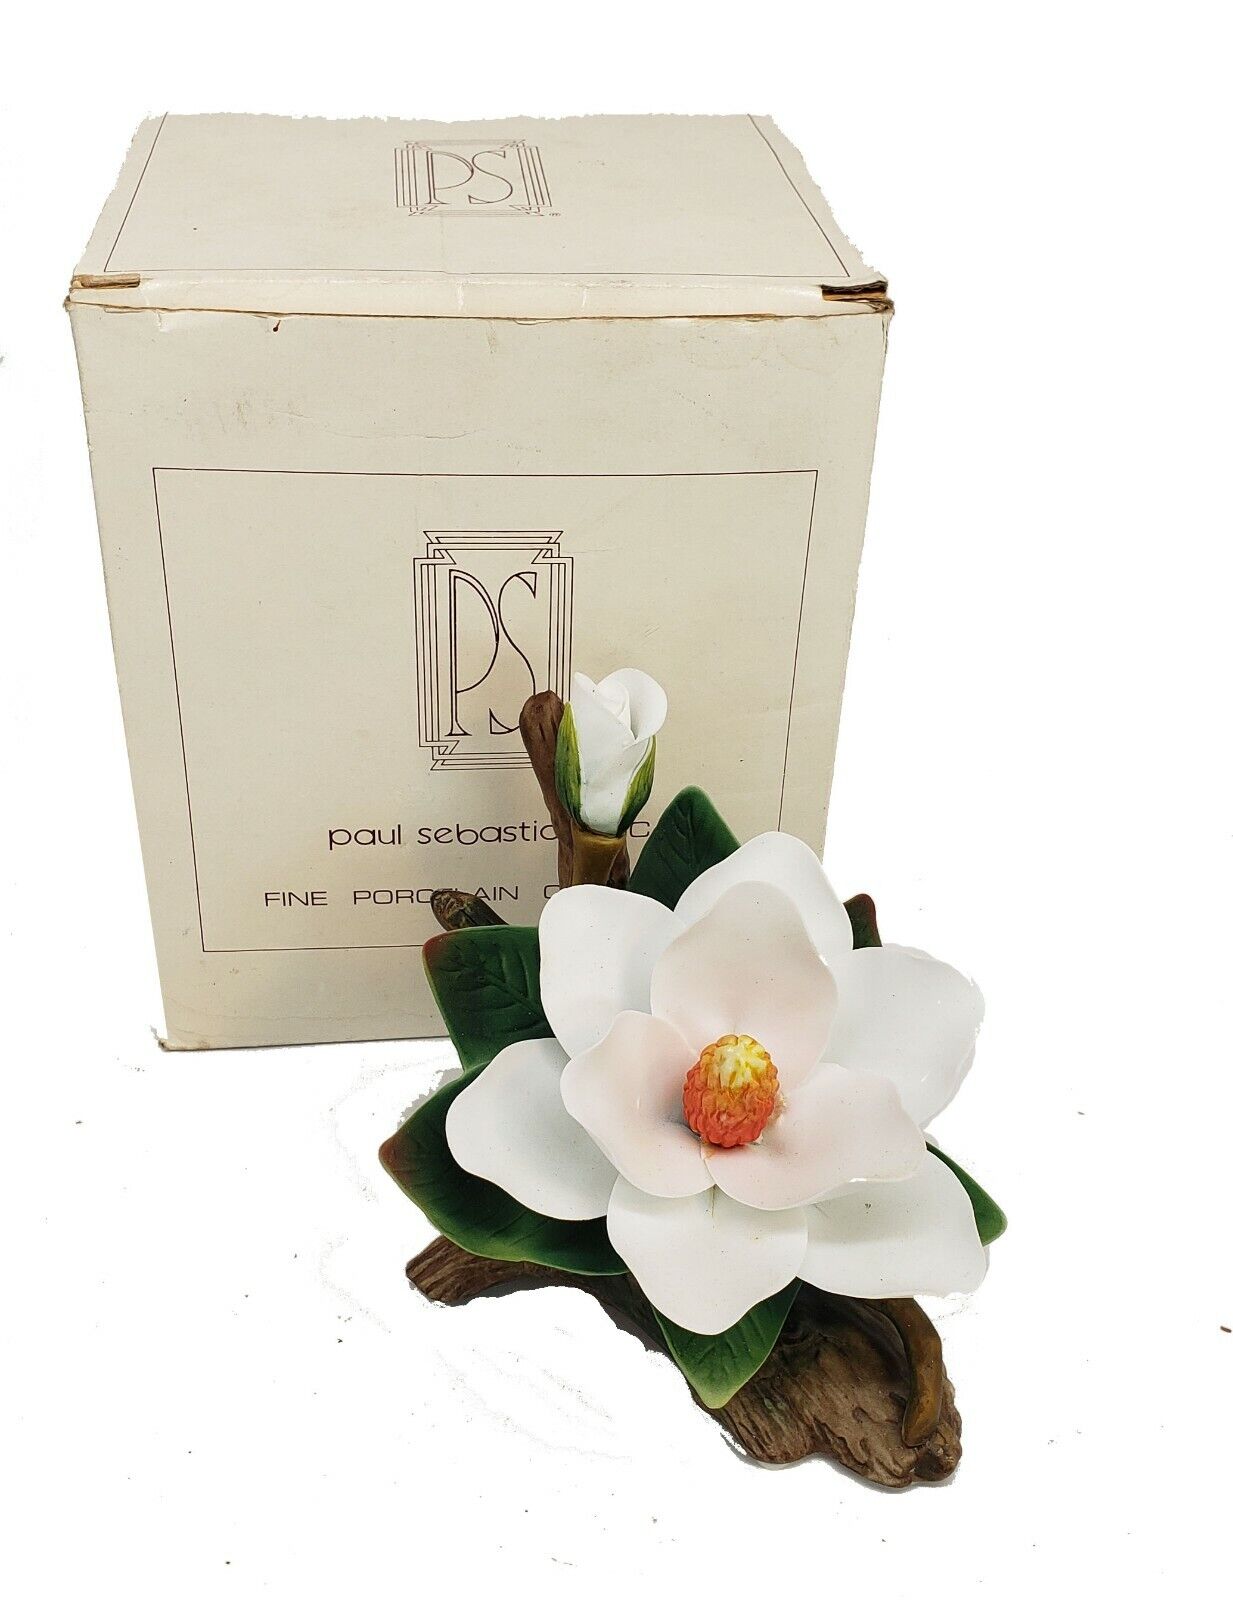 NEW IN BOX Lilly Flower 1990s Paul Sebastian Inc Fine Porcelain Collection